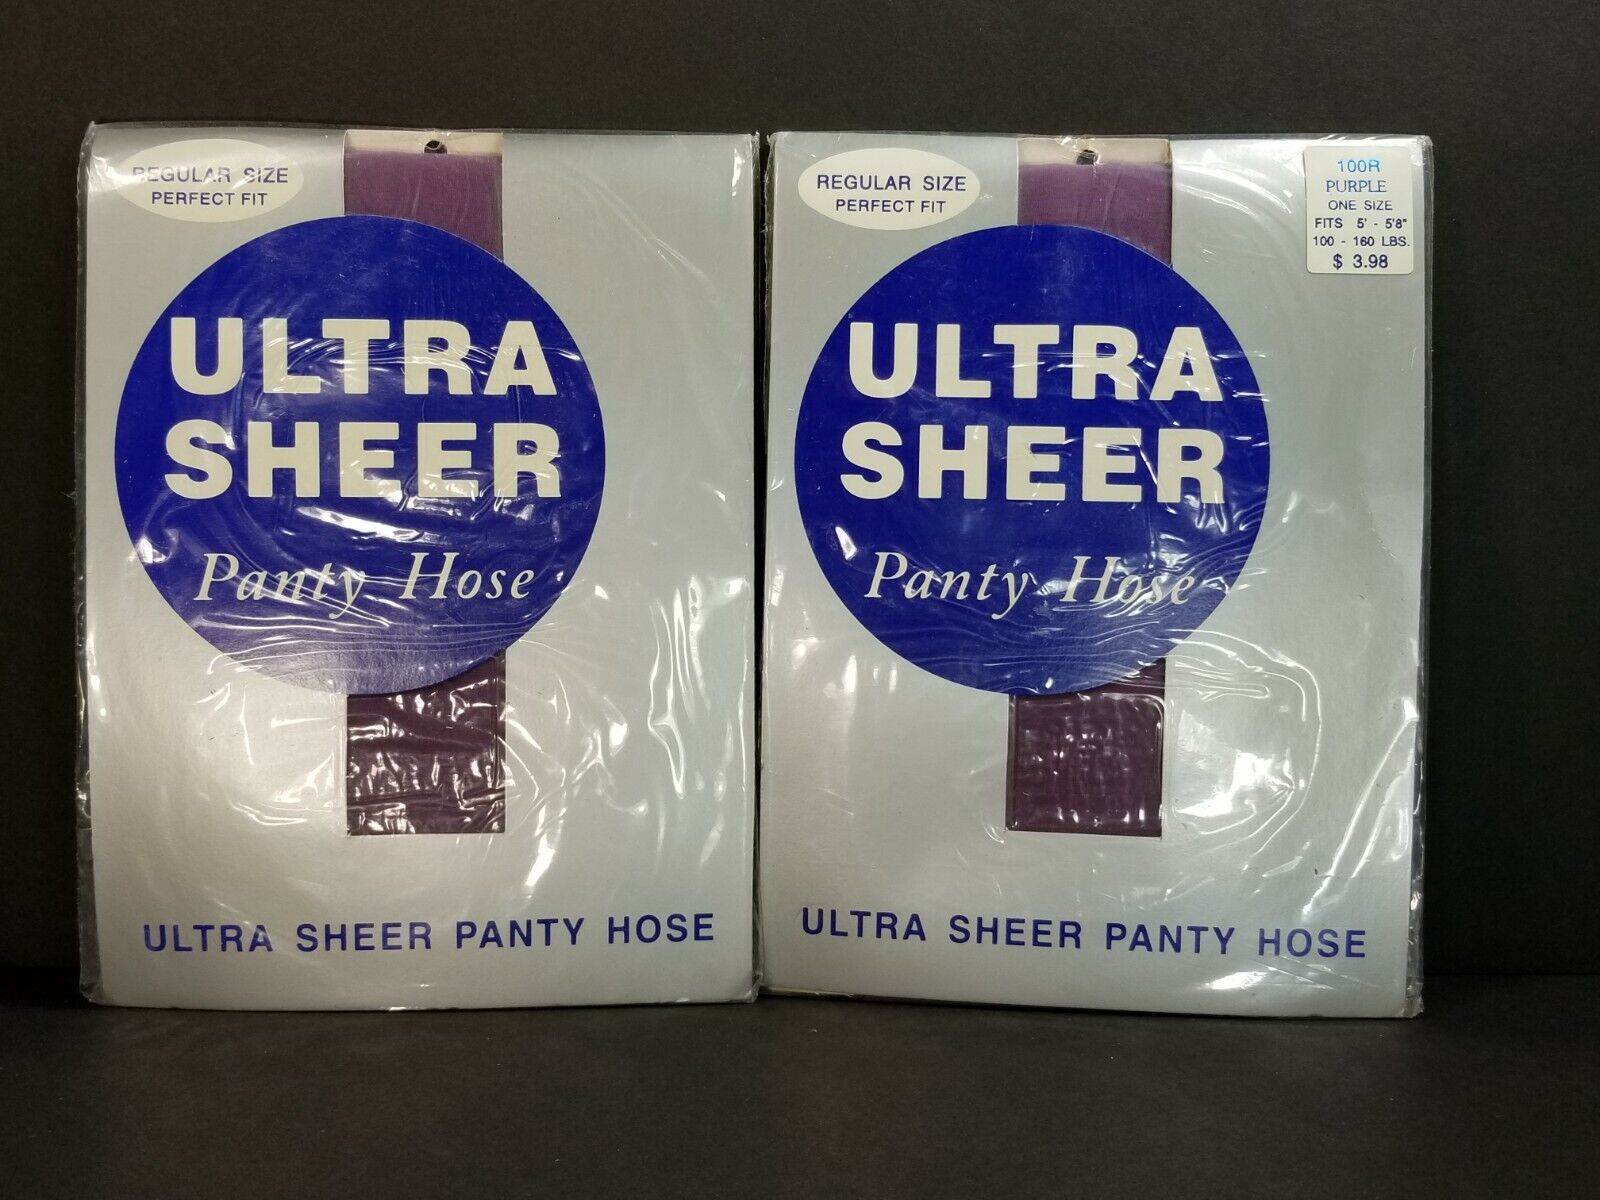 Vintage 80s Lot of 6 Ultra Sheer Panty Hose in Assorted Colors Regular Size 100R Ultra Sheer Does Not Apply - фотография #3